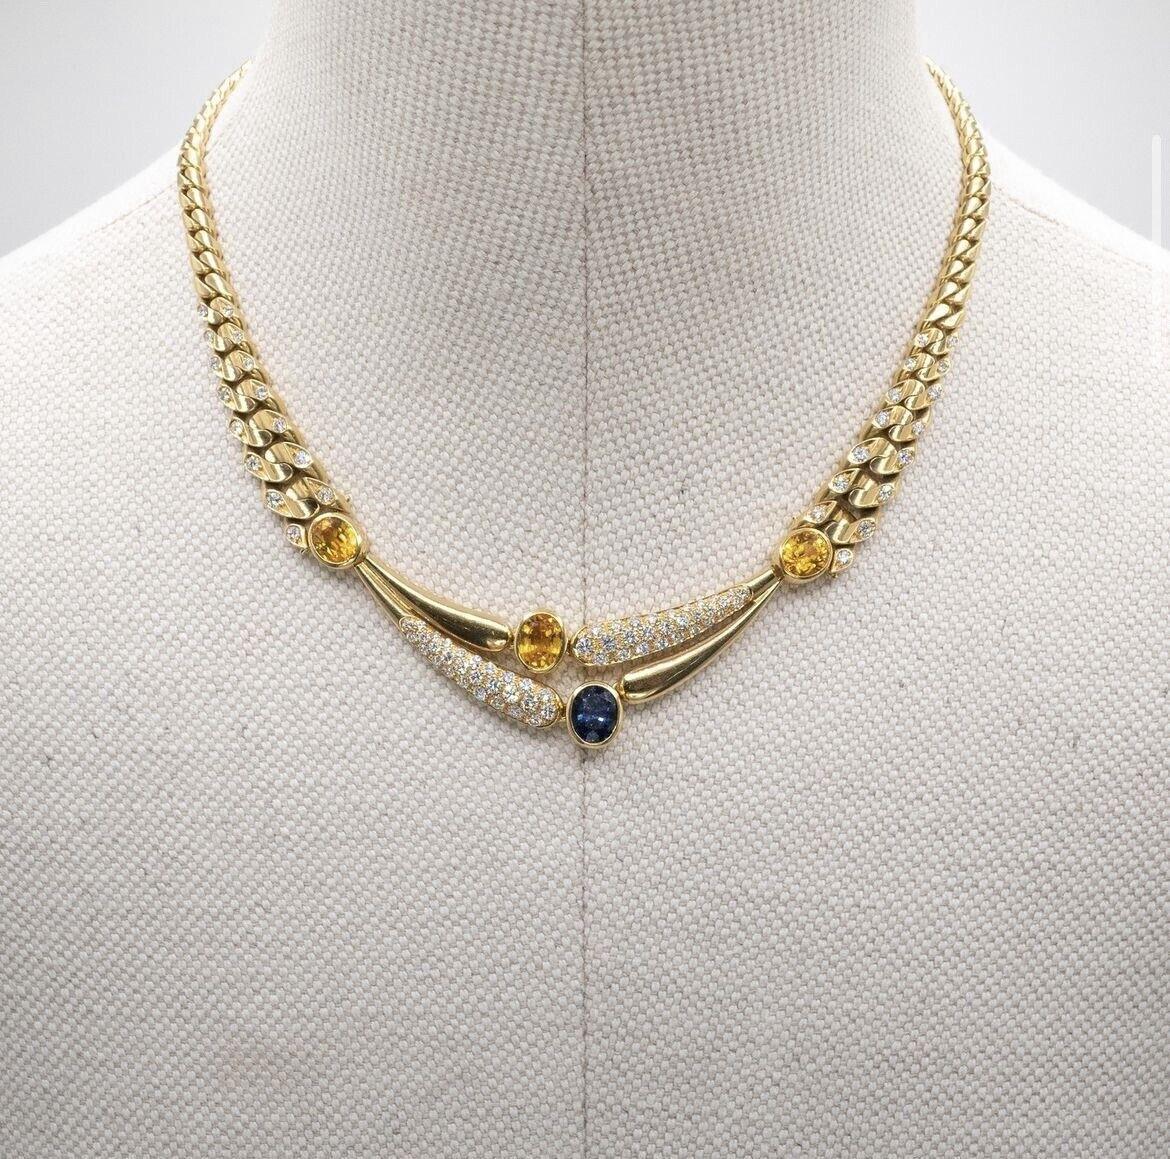 BVLGARI Italy 18k YG, Diamond, Blue & Yellow Sapphire Curb Link Necklace 1970s For Sale 2